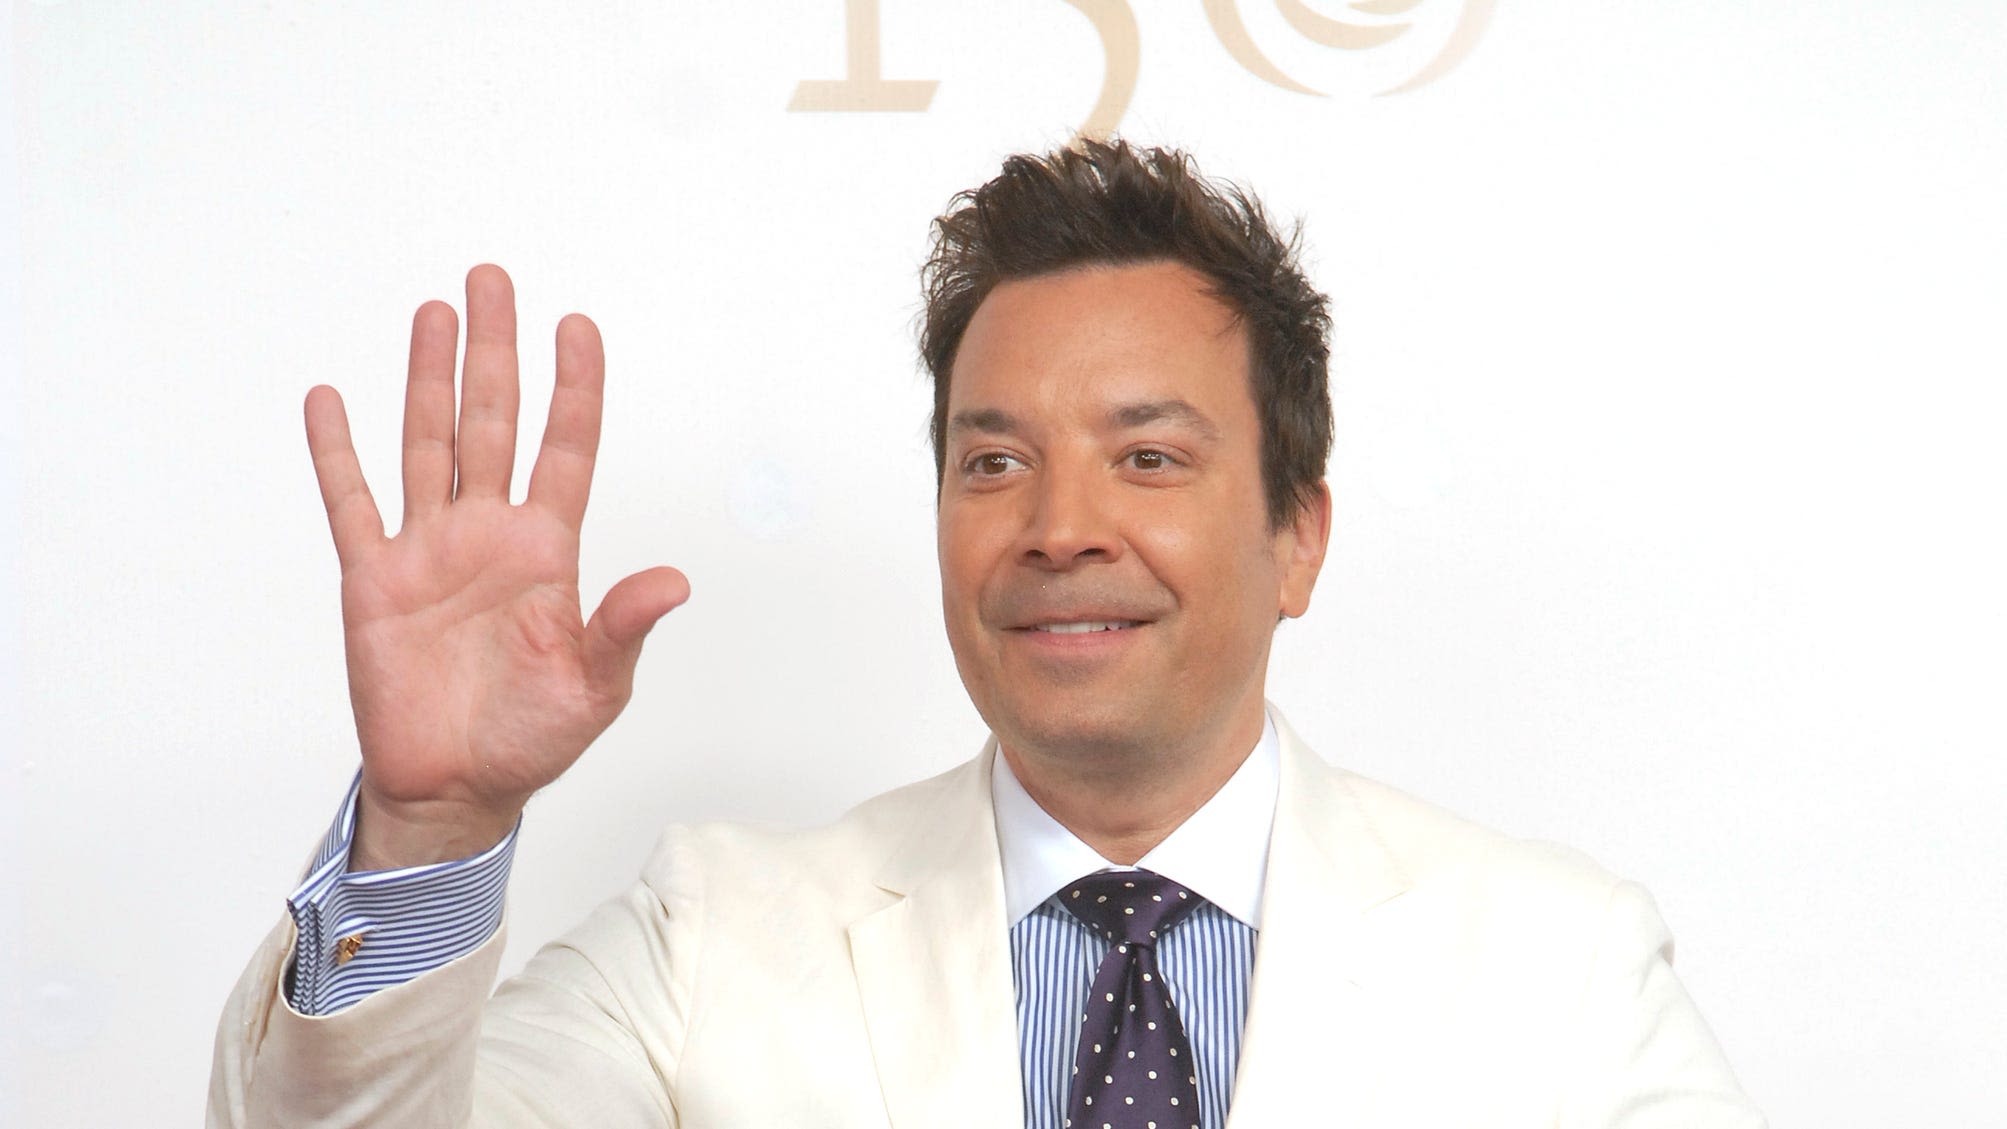 Jimmy Fallon says Nicole Kidman 'blindsided' him by revealing her crush on him on his chat show